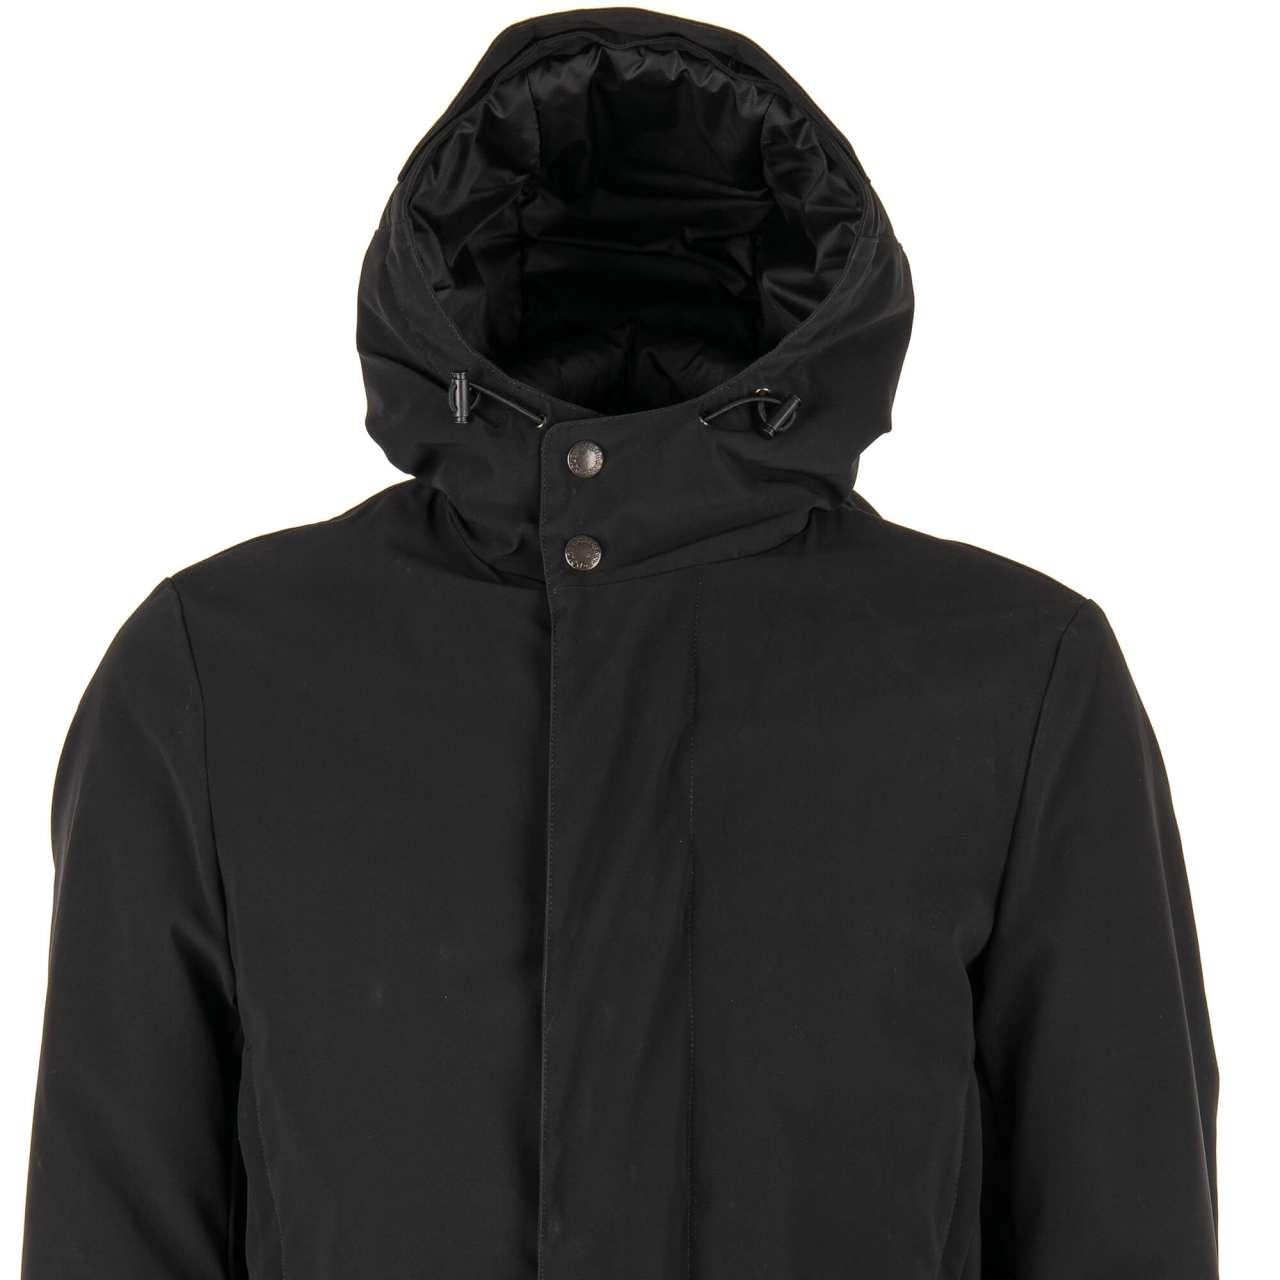 Dolce & Gabbana Classic Hooded Parka Jacket with Pockets and Logo Black 46 S For Sale 4